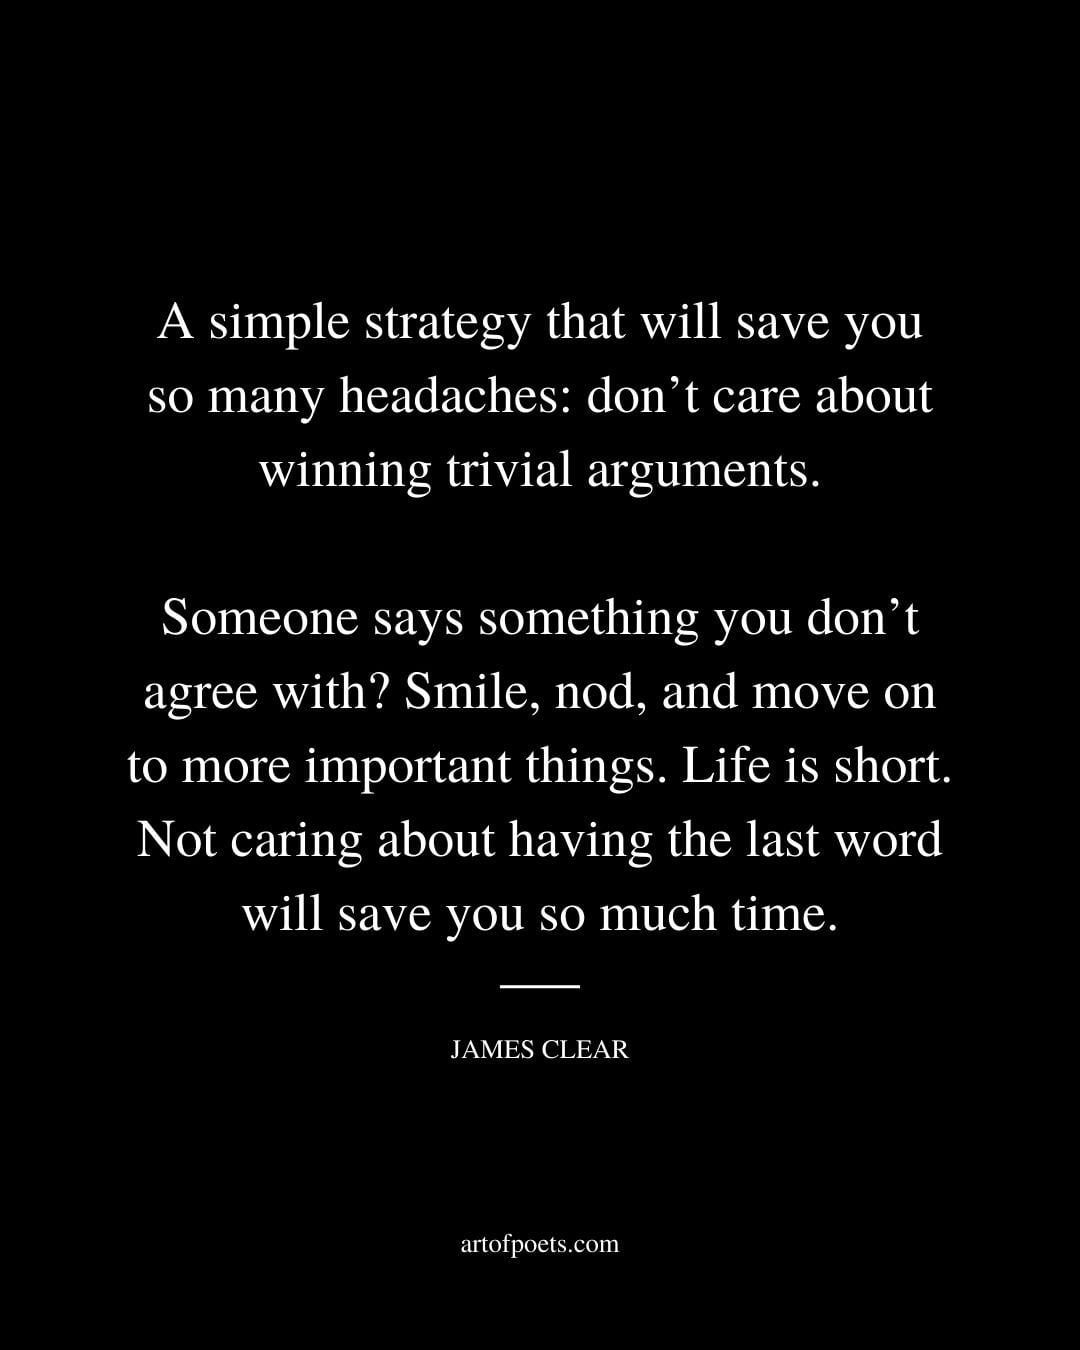 A simple strategy that will save you so many headaches dont care about winning trivial arguments